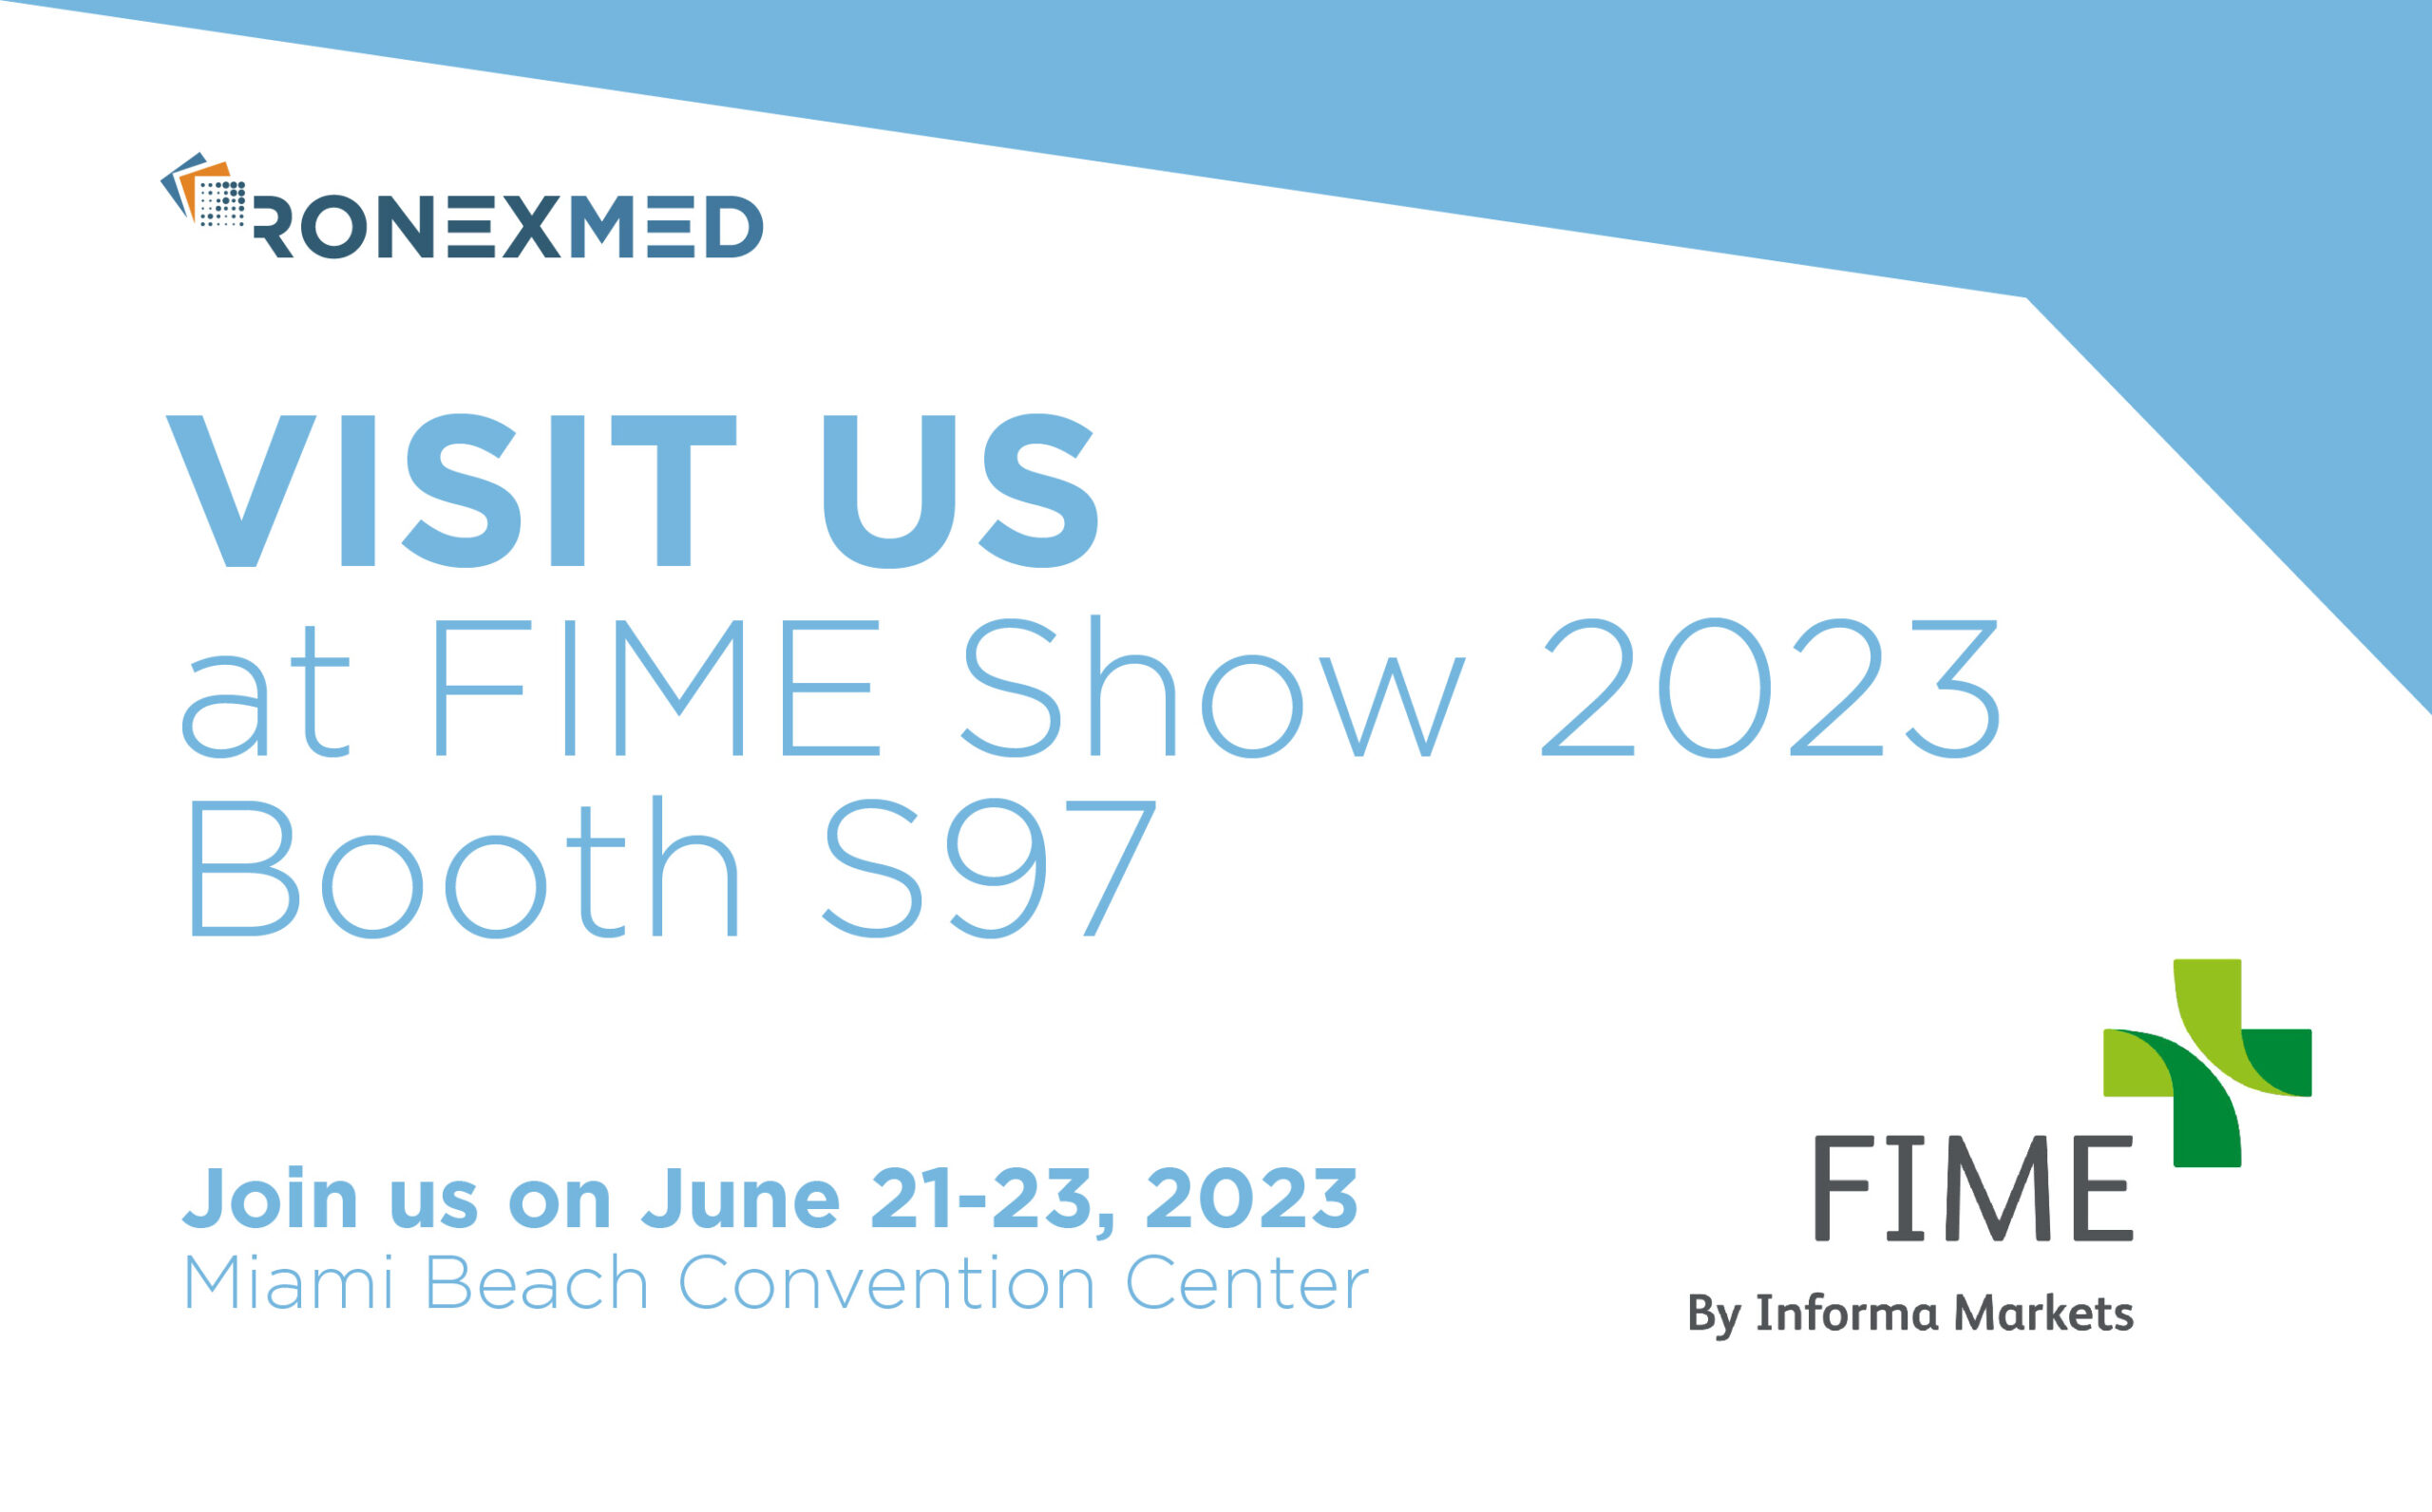 Join RonexMed at FIME Show 2023 Booth S97, Miami Beach Convention